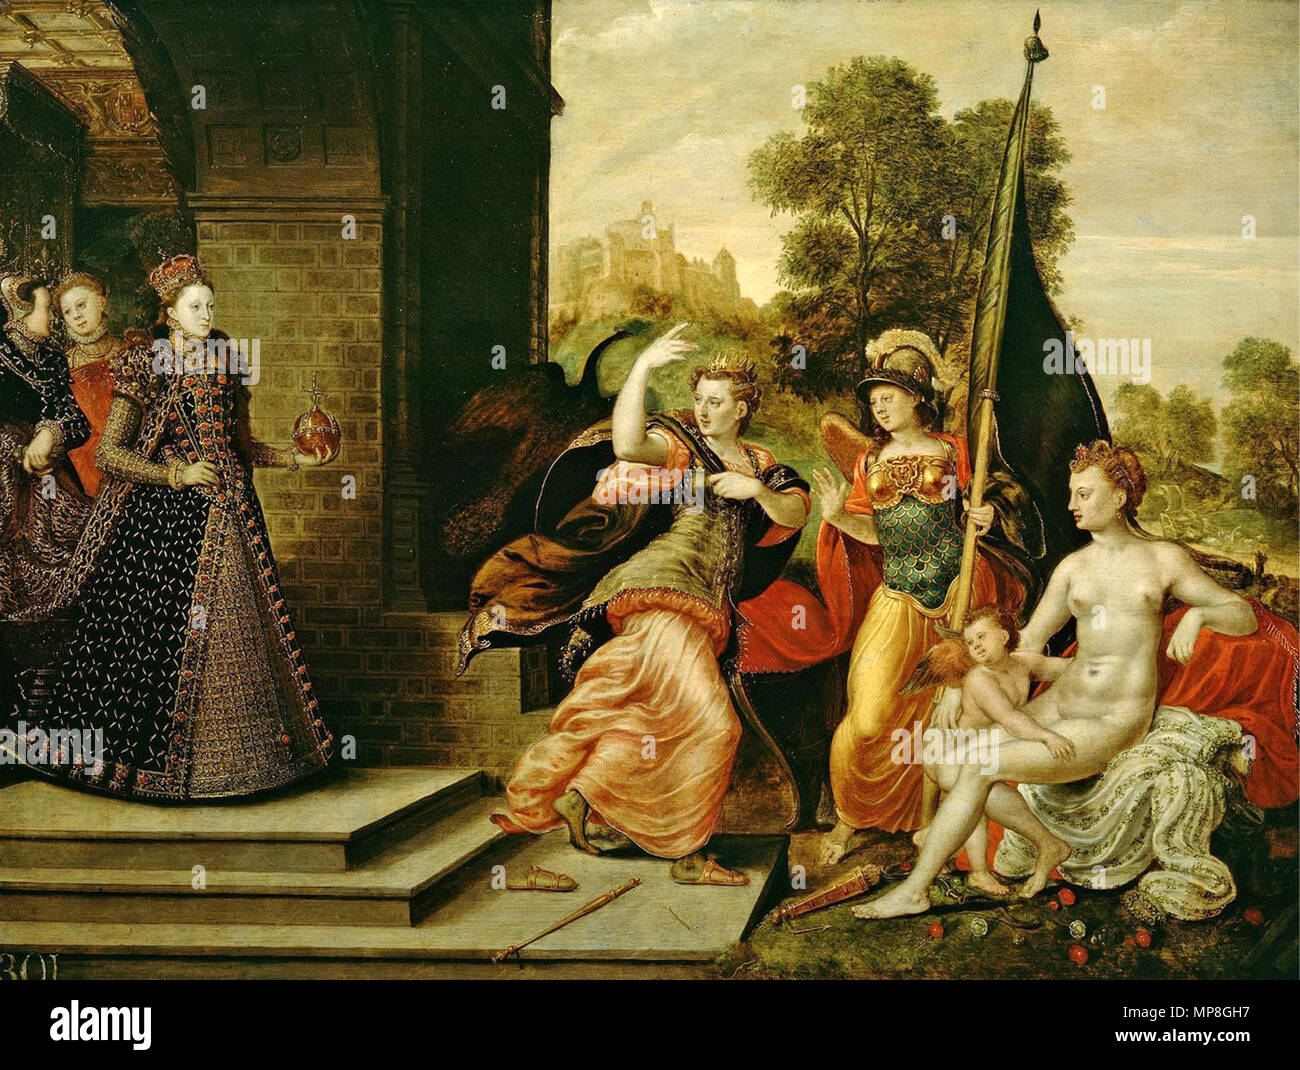 English: Elizabeth I and the Three Goddesses .  English: Allegoric representation of Elizabeth I with the goddesses Juno, Athena & Venus/Aphrodite. The fact that Juno seems to signal the Queen to walk towards the goddess suggests that the painting was commissioned to pressure Elizabeth into marriage. . 1569.   738 Joris Hoefnagel or Hans Eworth - Queen Elizabeth I &amp; the Three Goddesses, ca 1569 Stock Photo